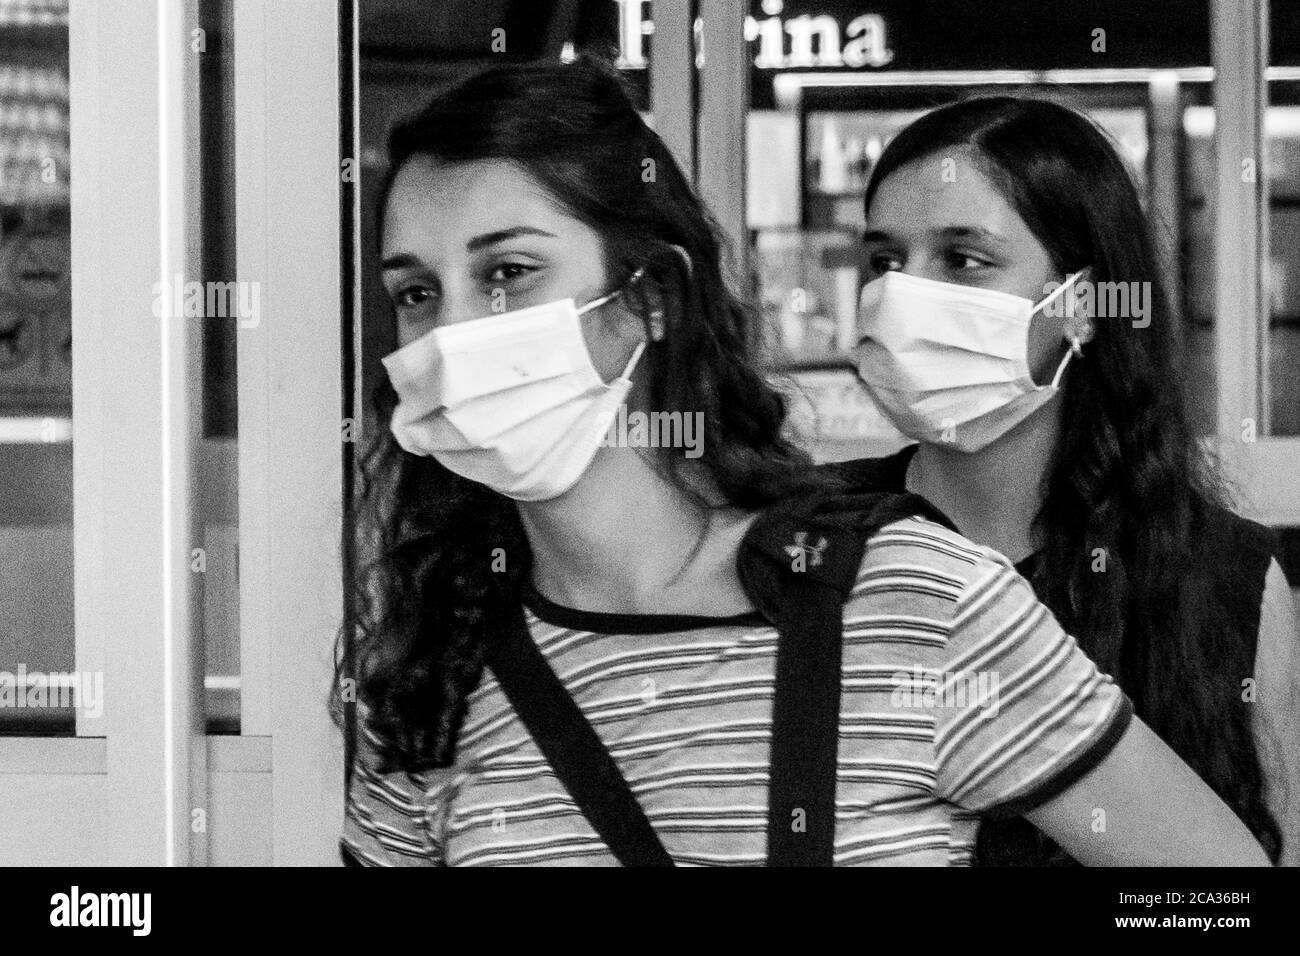 Tel Aviv, Israel. 3rd Aug, 2020. Passengers on a United Airlines flight from Newark, New York, arrive at Tel Aviv's Ben Gurion International Airport in spite of travel restrictions and flight cancellations due to the Coronavirus outbreak. Yet another political debate rocks Israeli society as government seems to give in to pressure from Jewish ultra Orthodox coalition partners announcing it will allow entry to the country to 12,000 religious yeshiva students, mostly from the U.S., in spite of Coronavirus restrictions. Credit: Nir Alon/Alamy Live News Stock Photo